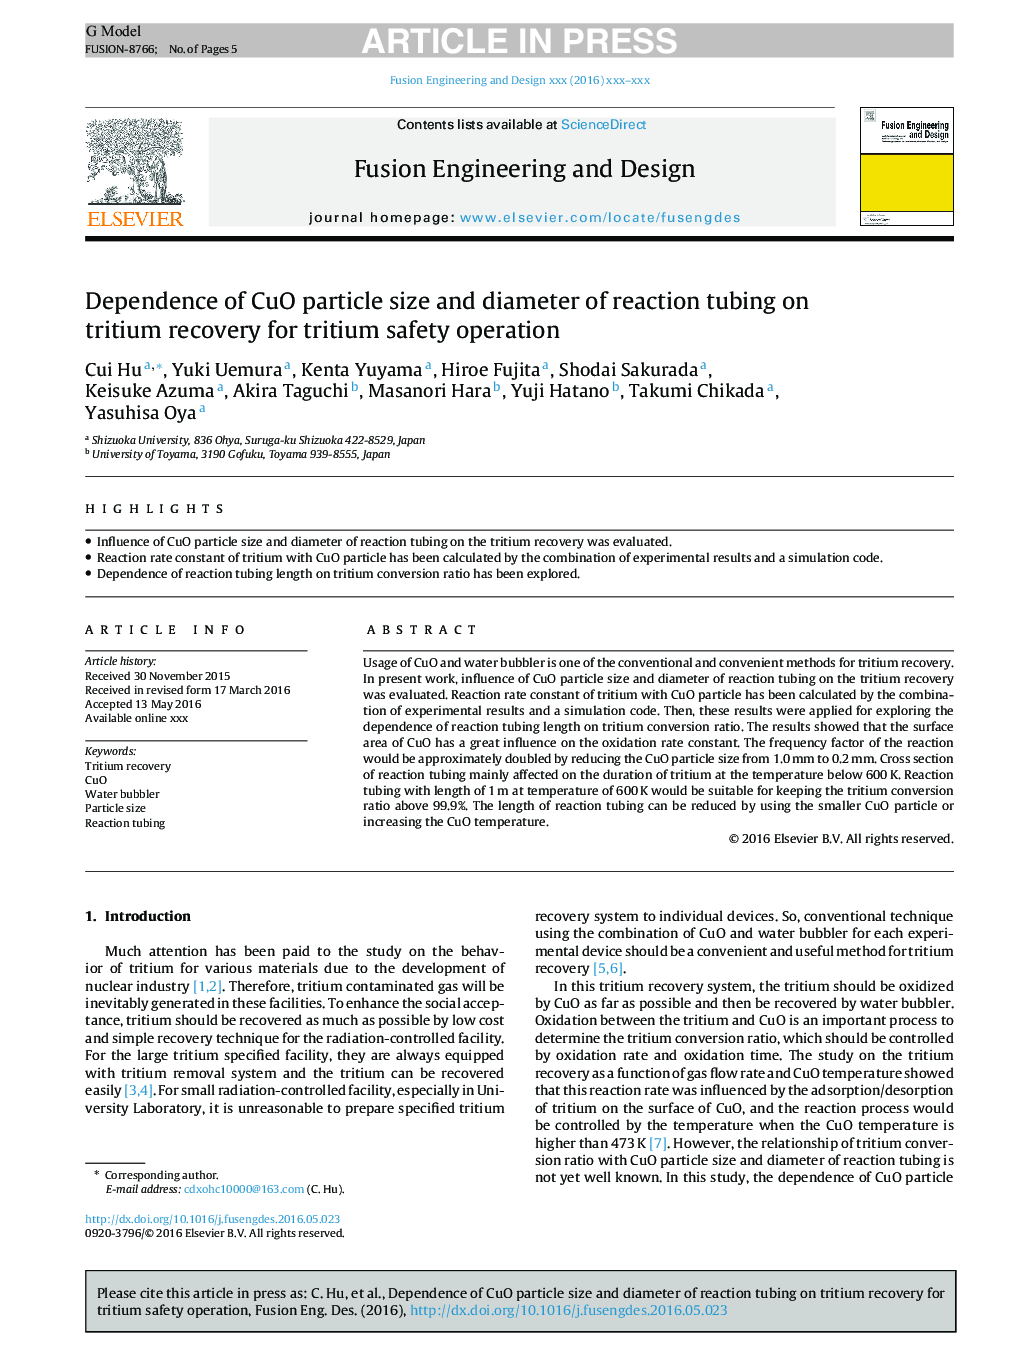 Dependence of CuO particle size and diameter of reaction tubing on tritium recovery for tritium safety operation